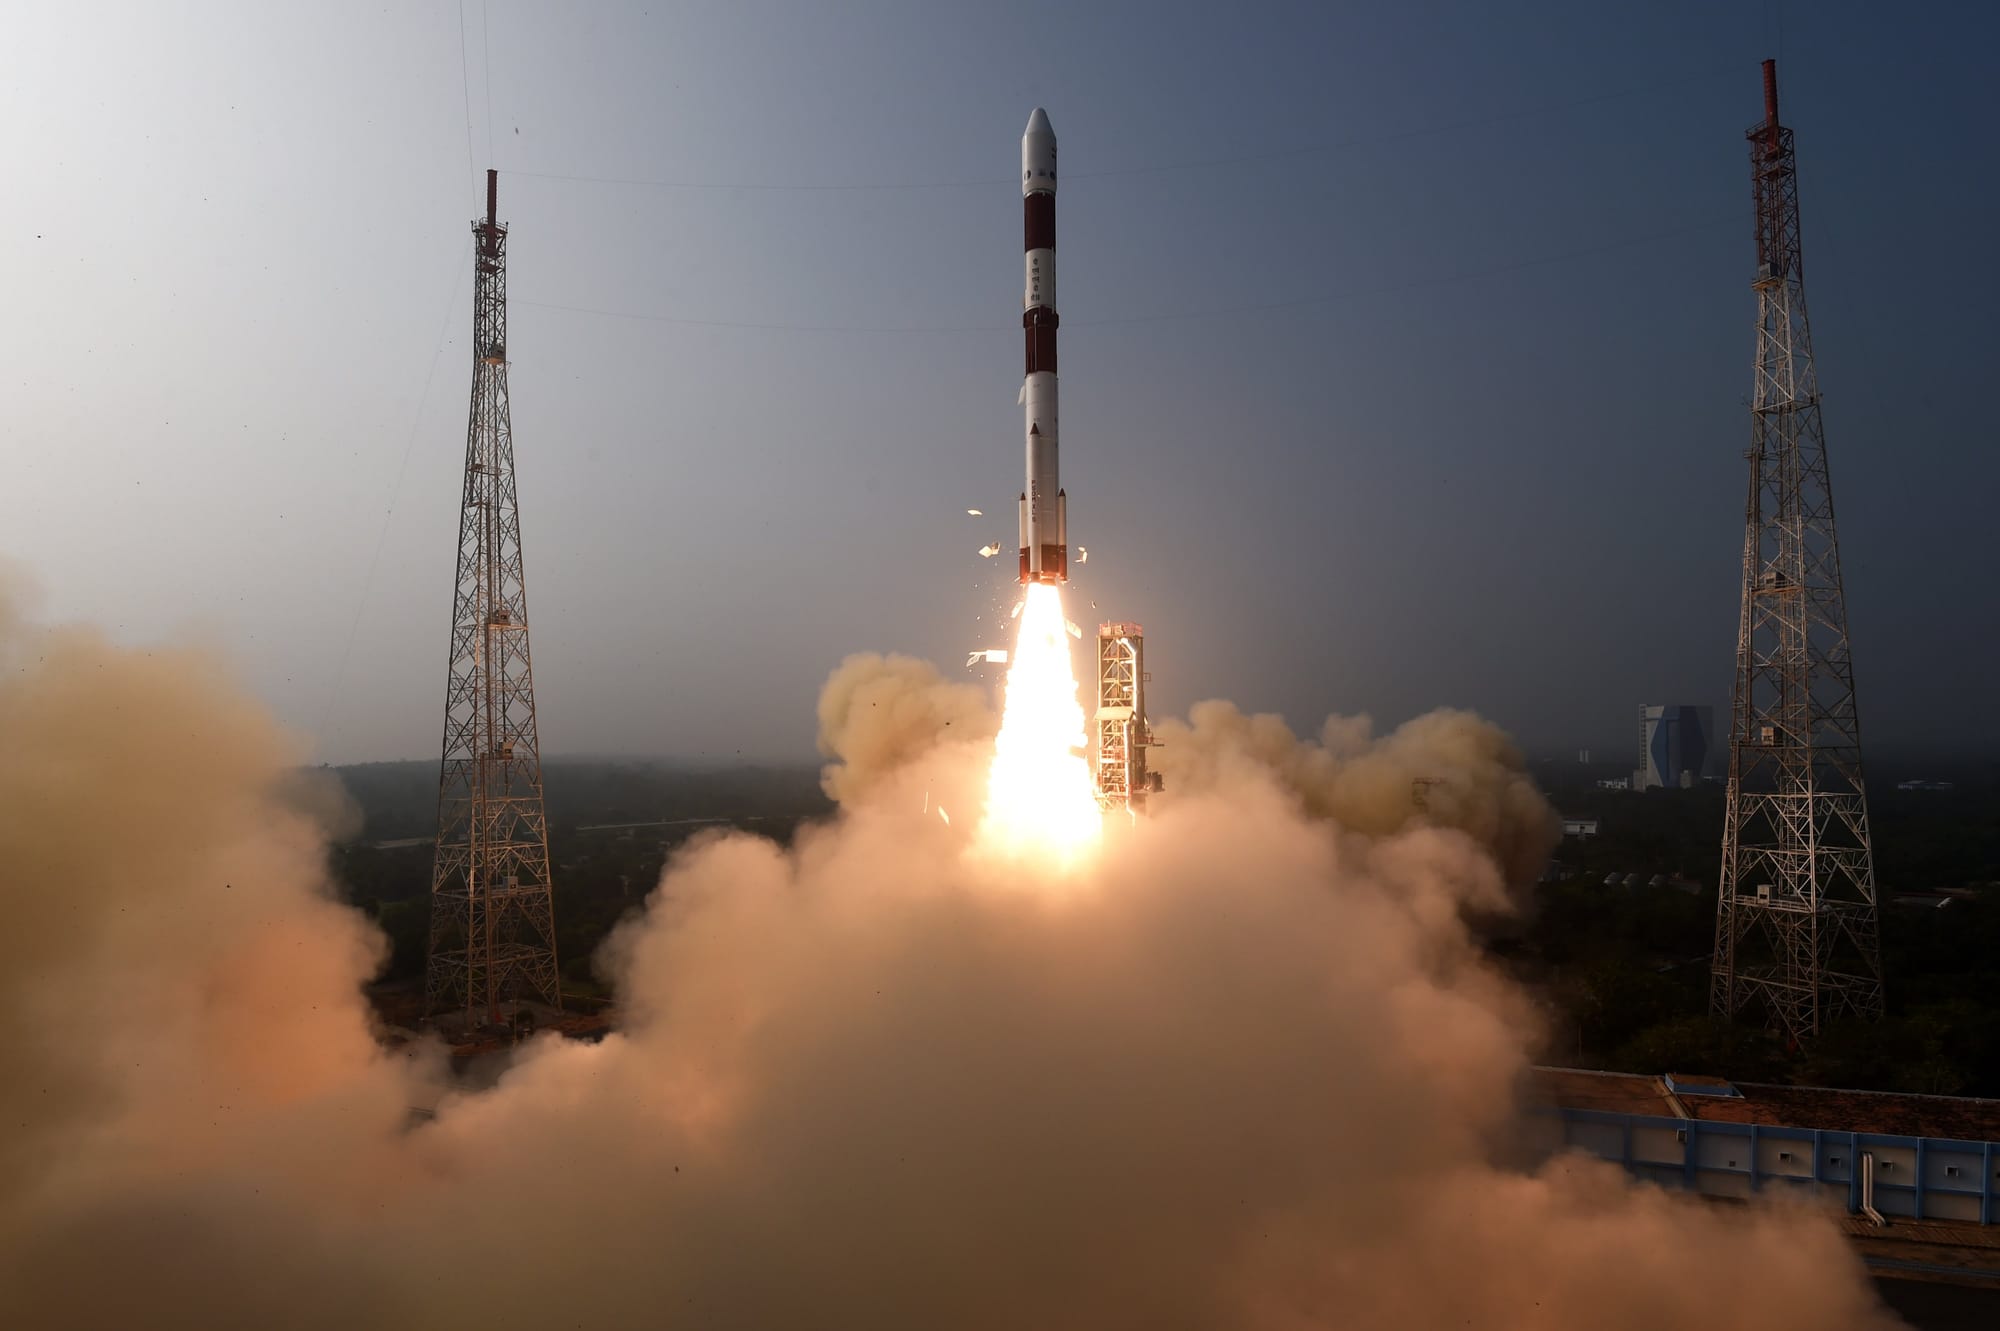 PSLV-DL lifting off from its launch pad at the Satish Dhawan Space Center. ©ISRO